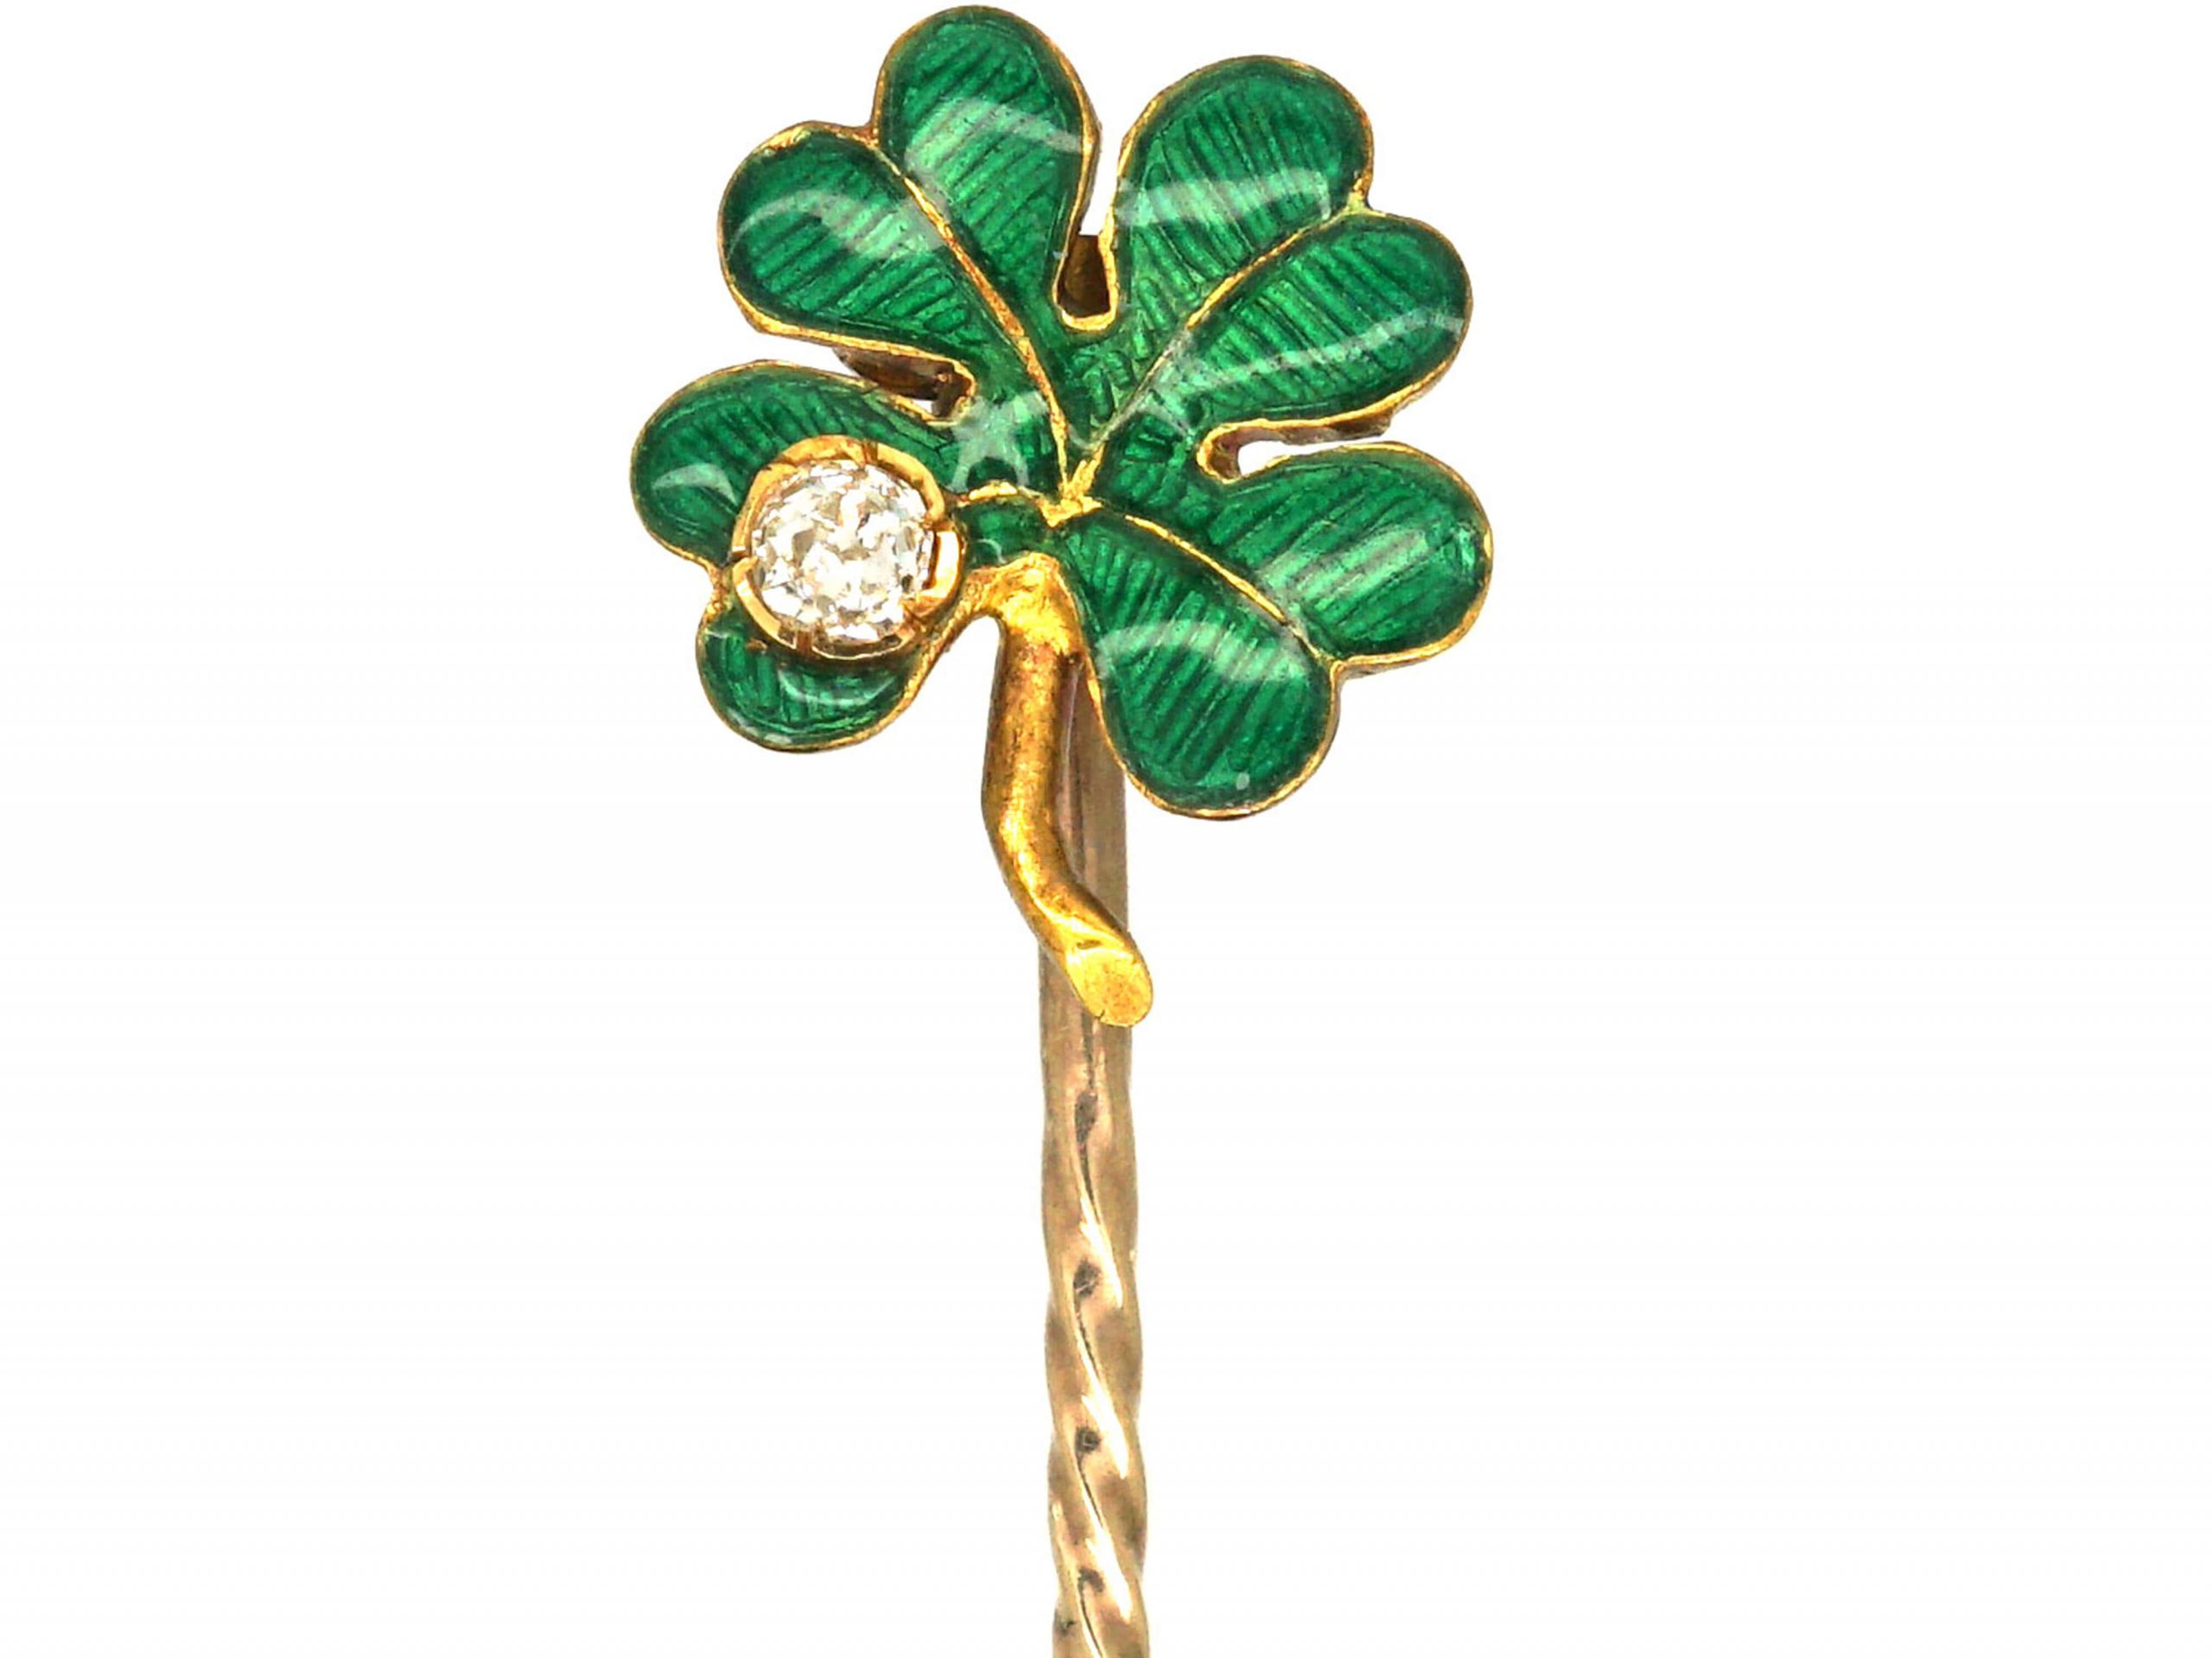 9ct Gold, Green Crystal 4 Leaf Clover Pendant in Green